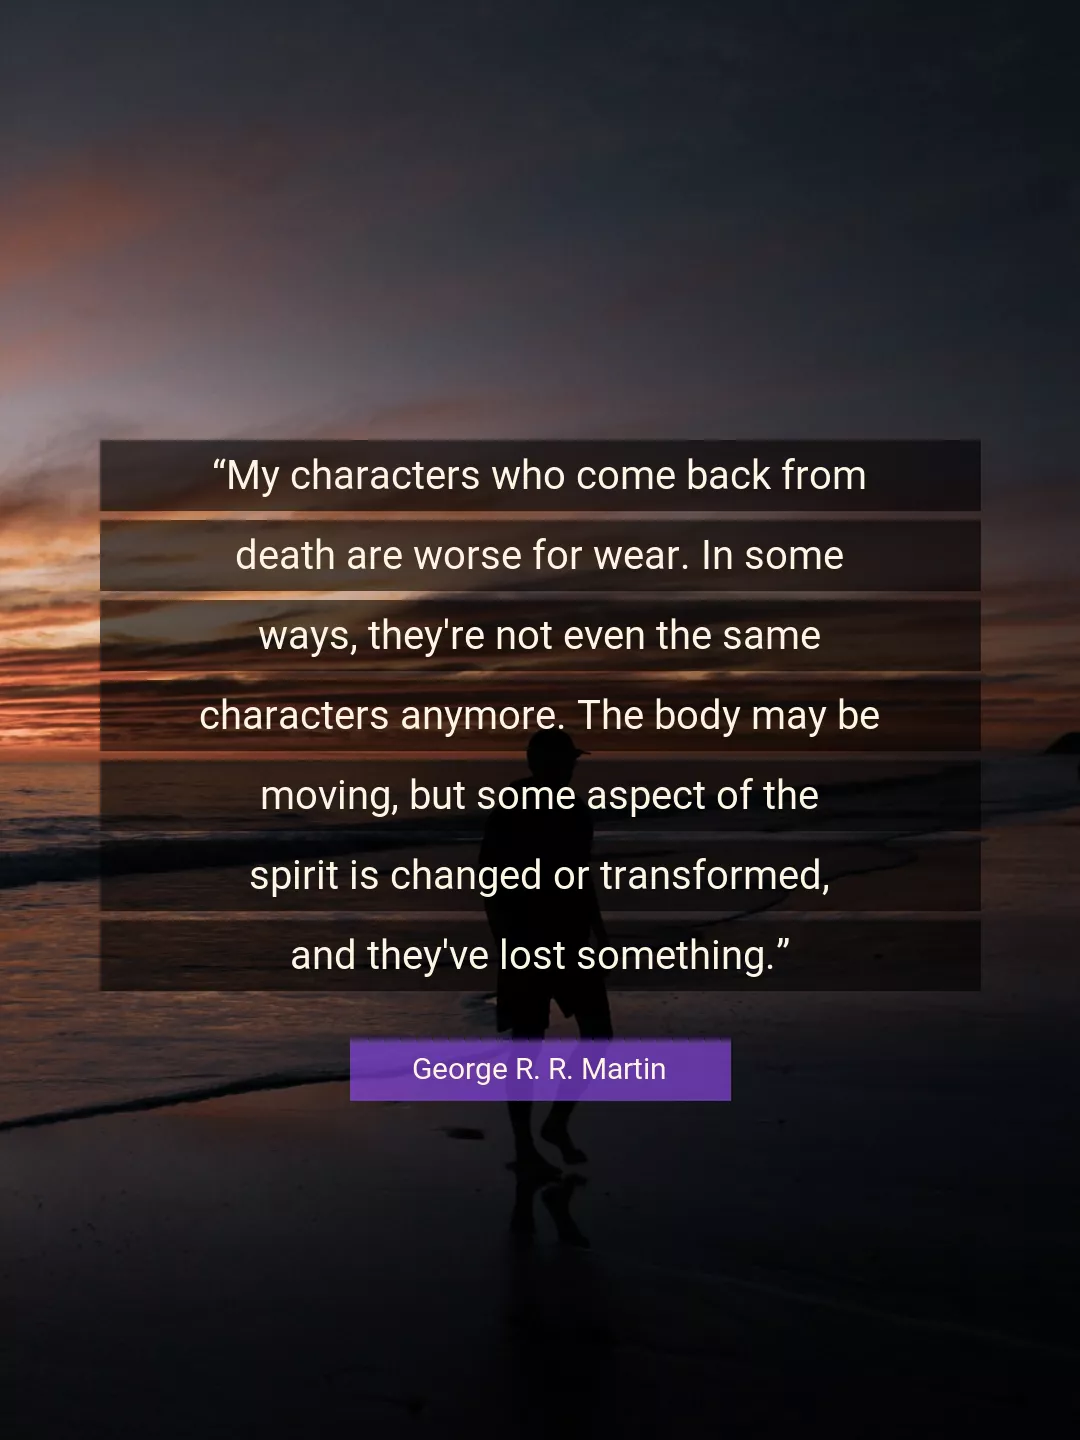 Quote About Death By George R. R. Martin